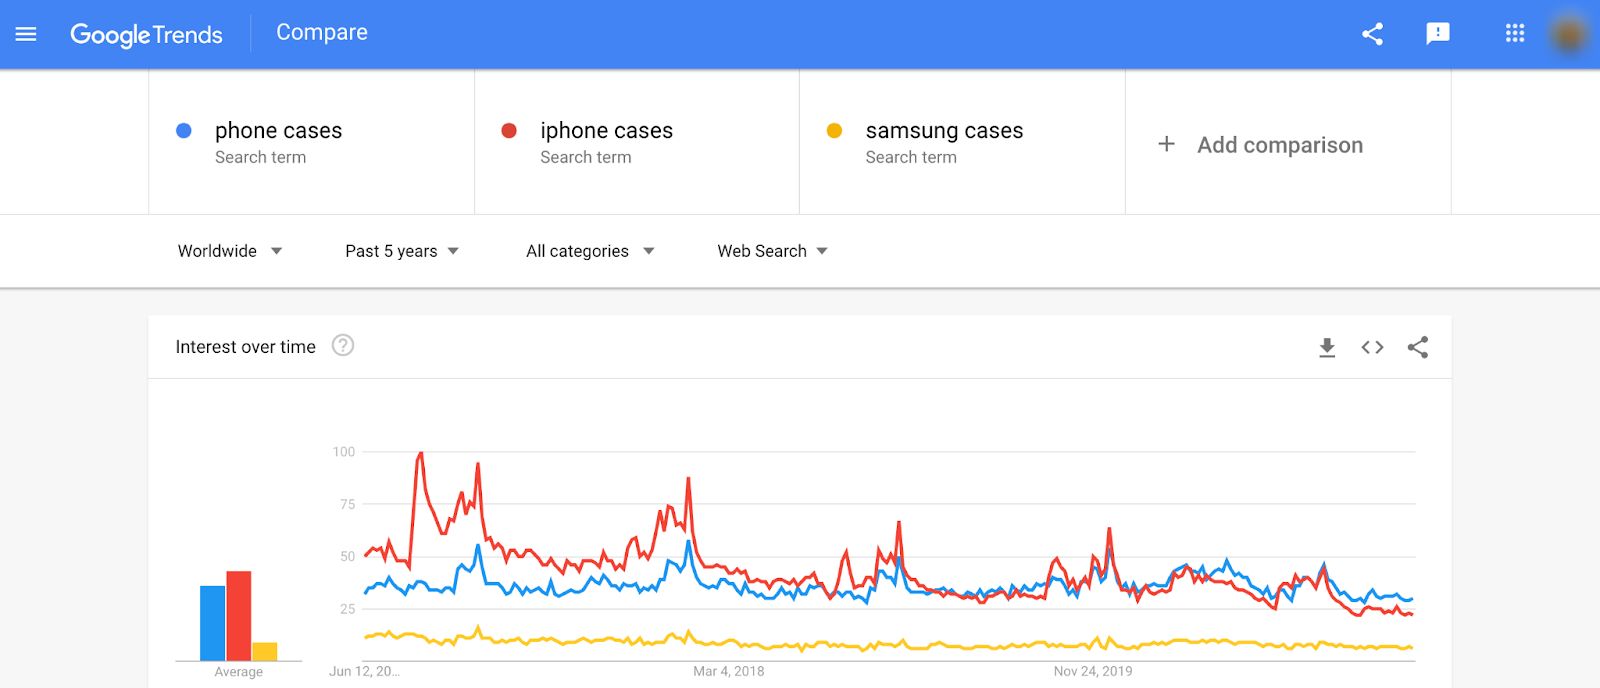 How to do product research on Google Trends: iPhone cases vs. Samsung cases.